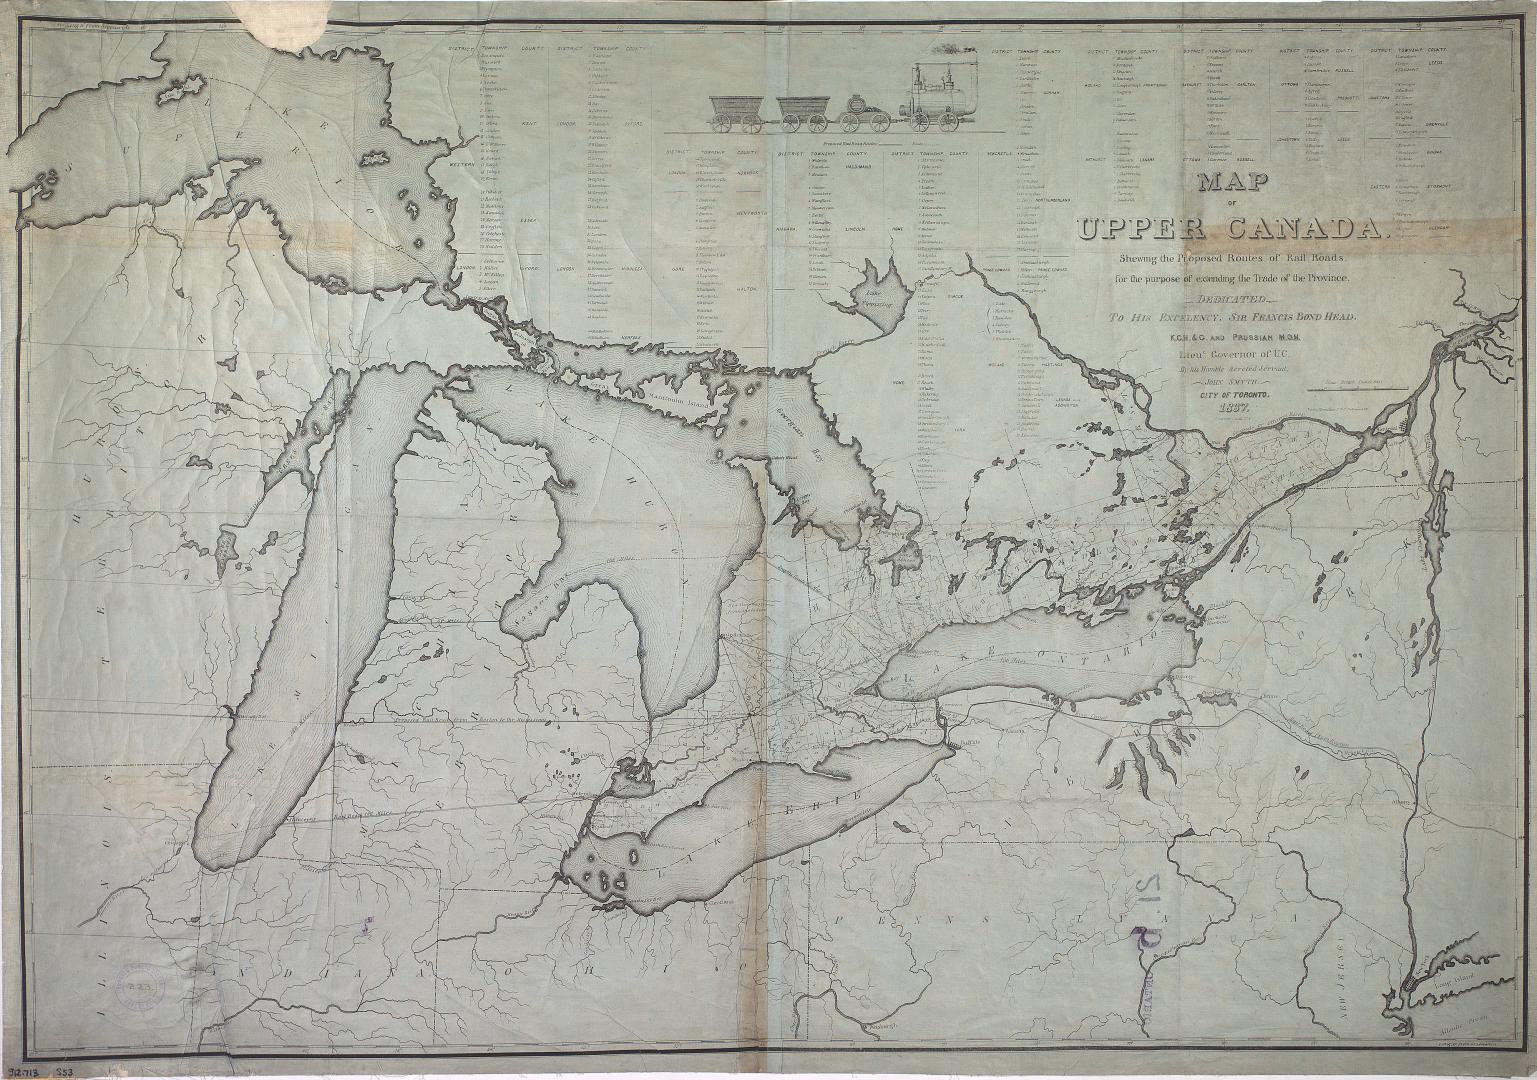 Map of Upper Canada shewing the proposed routes of rail roads for the purpose of extending the trade of the province